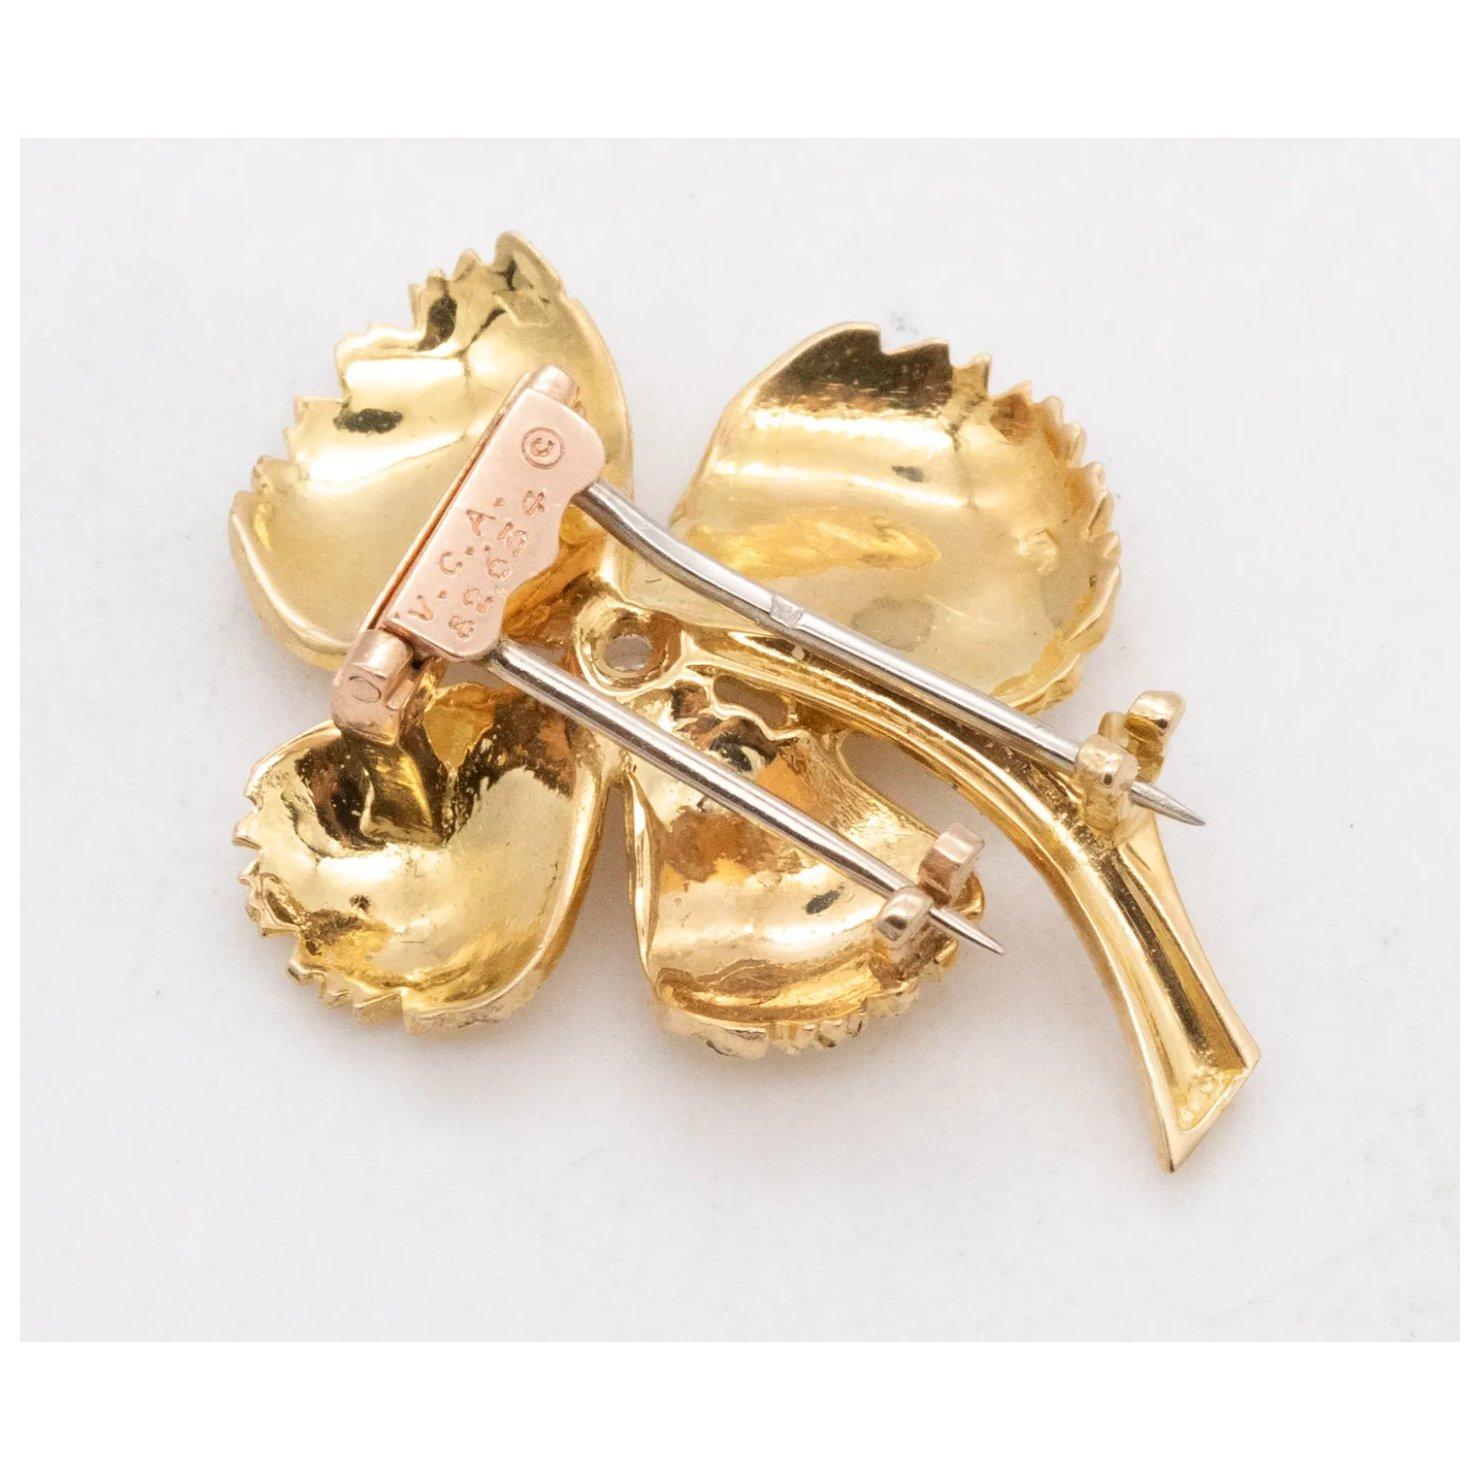 Van Cleef & Arpels Paris 18k Yellow Gold & Diamond 4 Leaf Clover Clip Brooch In Excellent Condition For Sale In Beverly Hills, CA